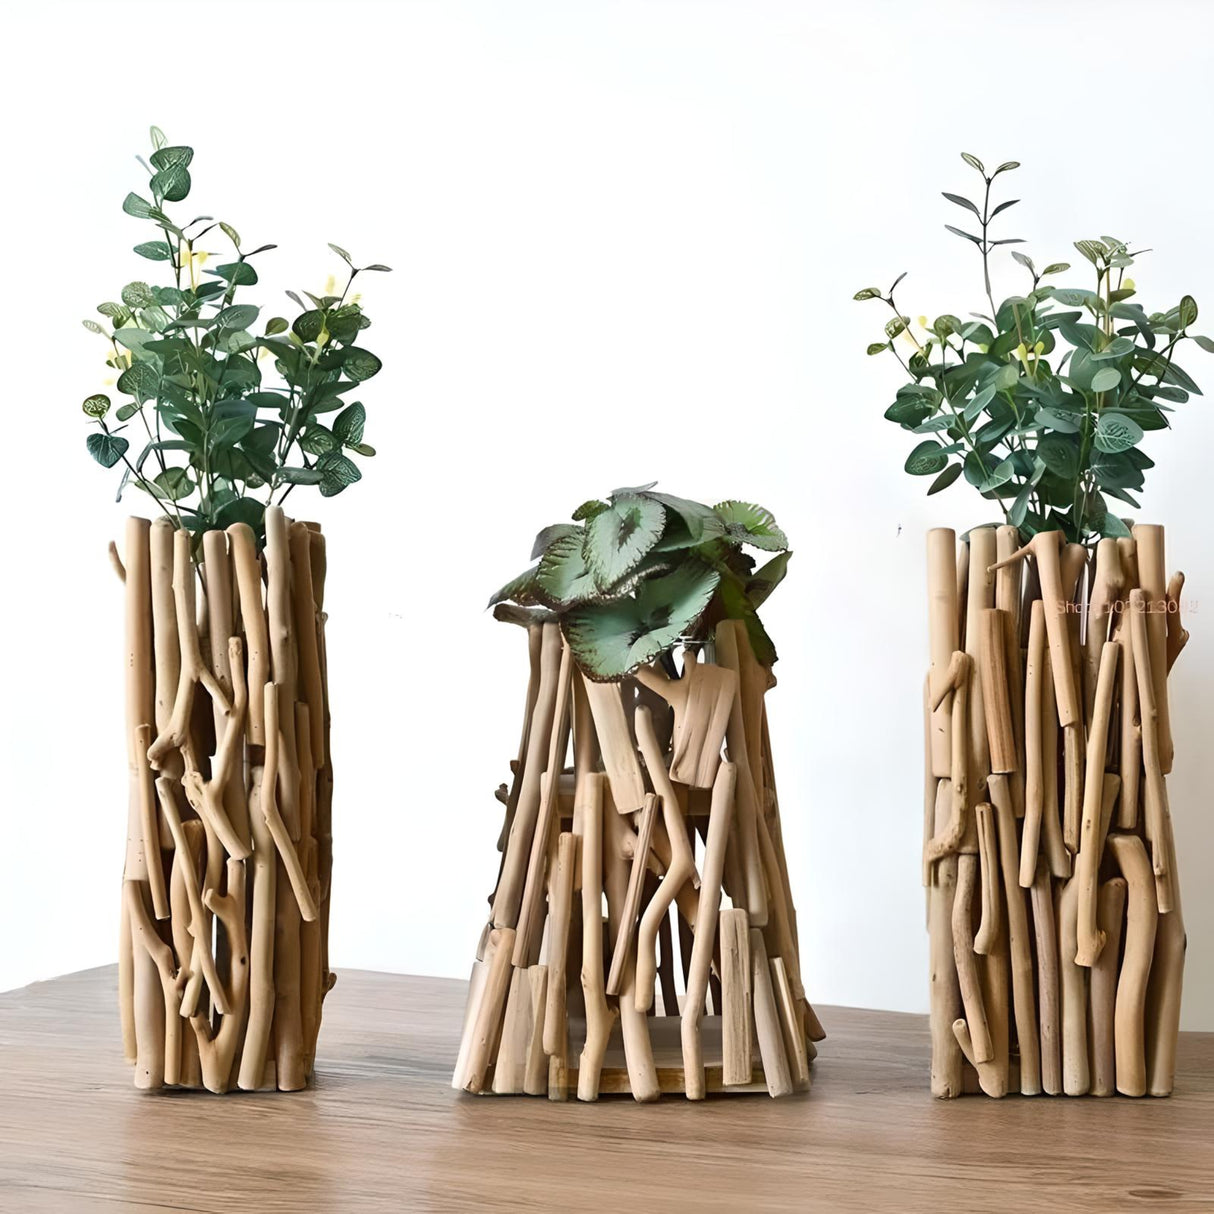 "Geometric Wood Vase: Handcrafted Tabletop Decoration"